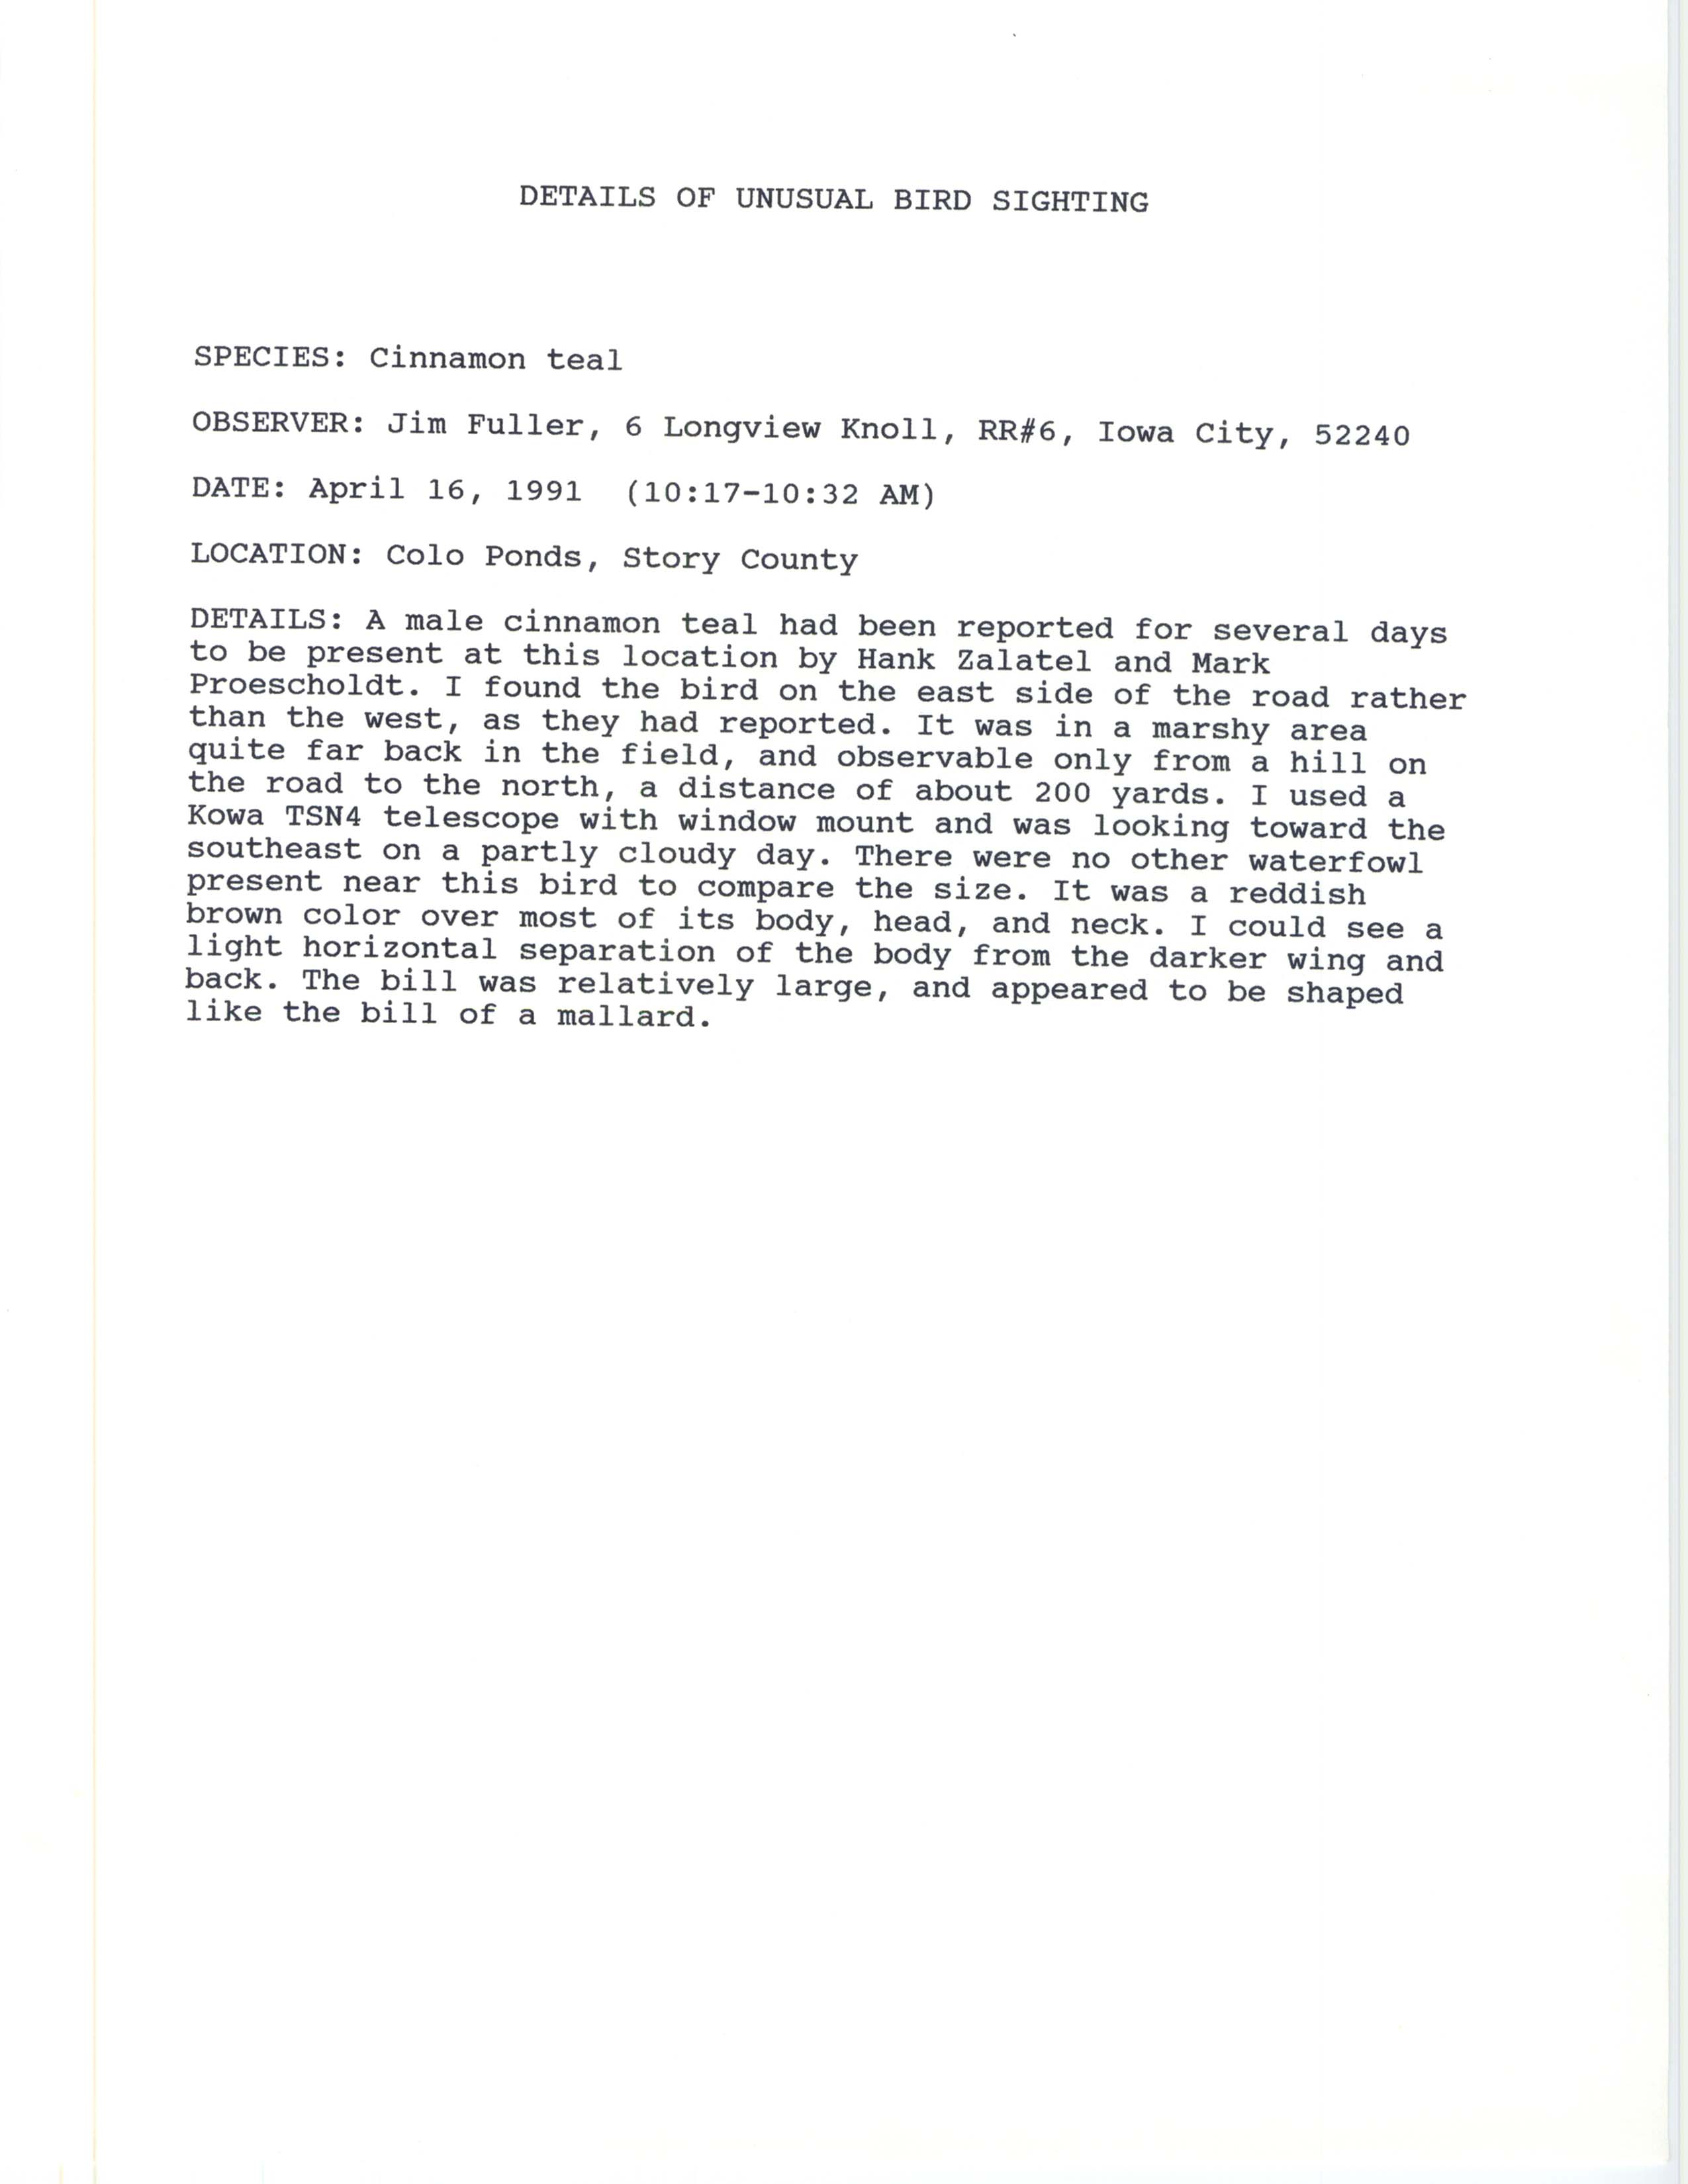 Rare bird documentation form for Cinnamon Teal at Colo Ponds, 1991